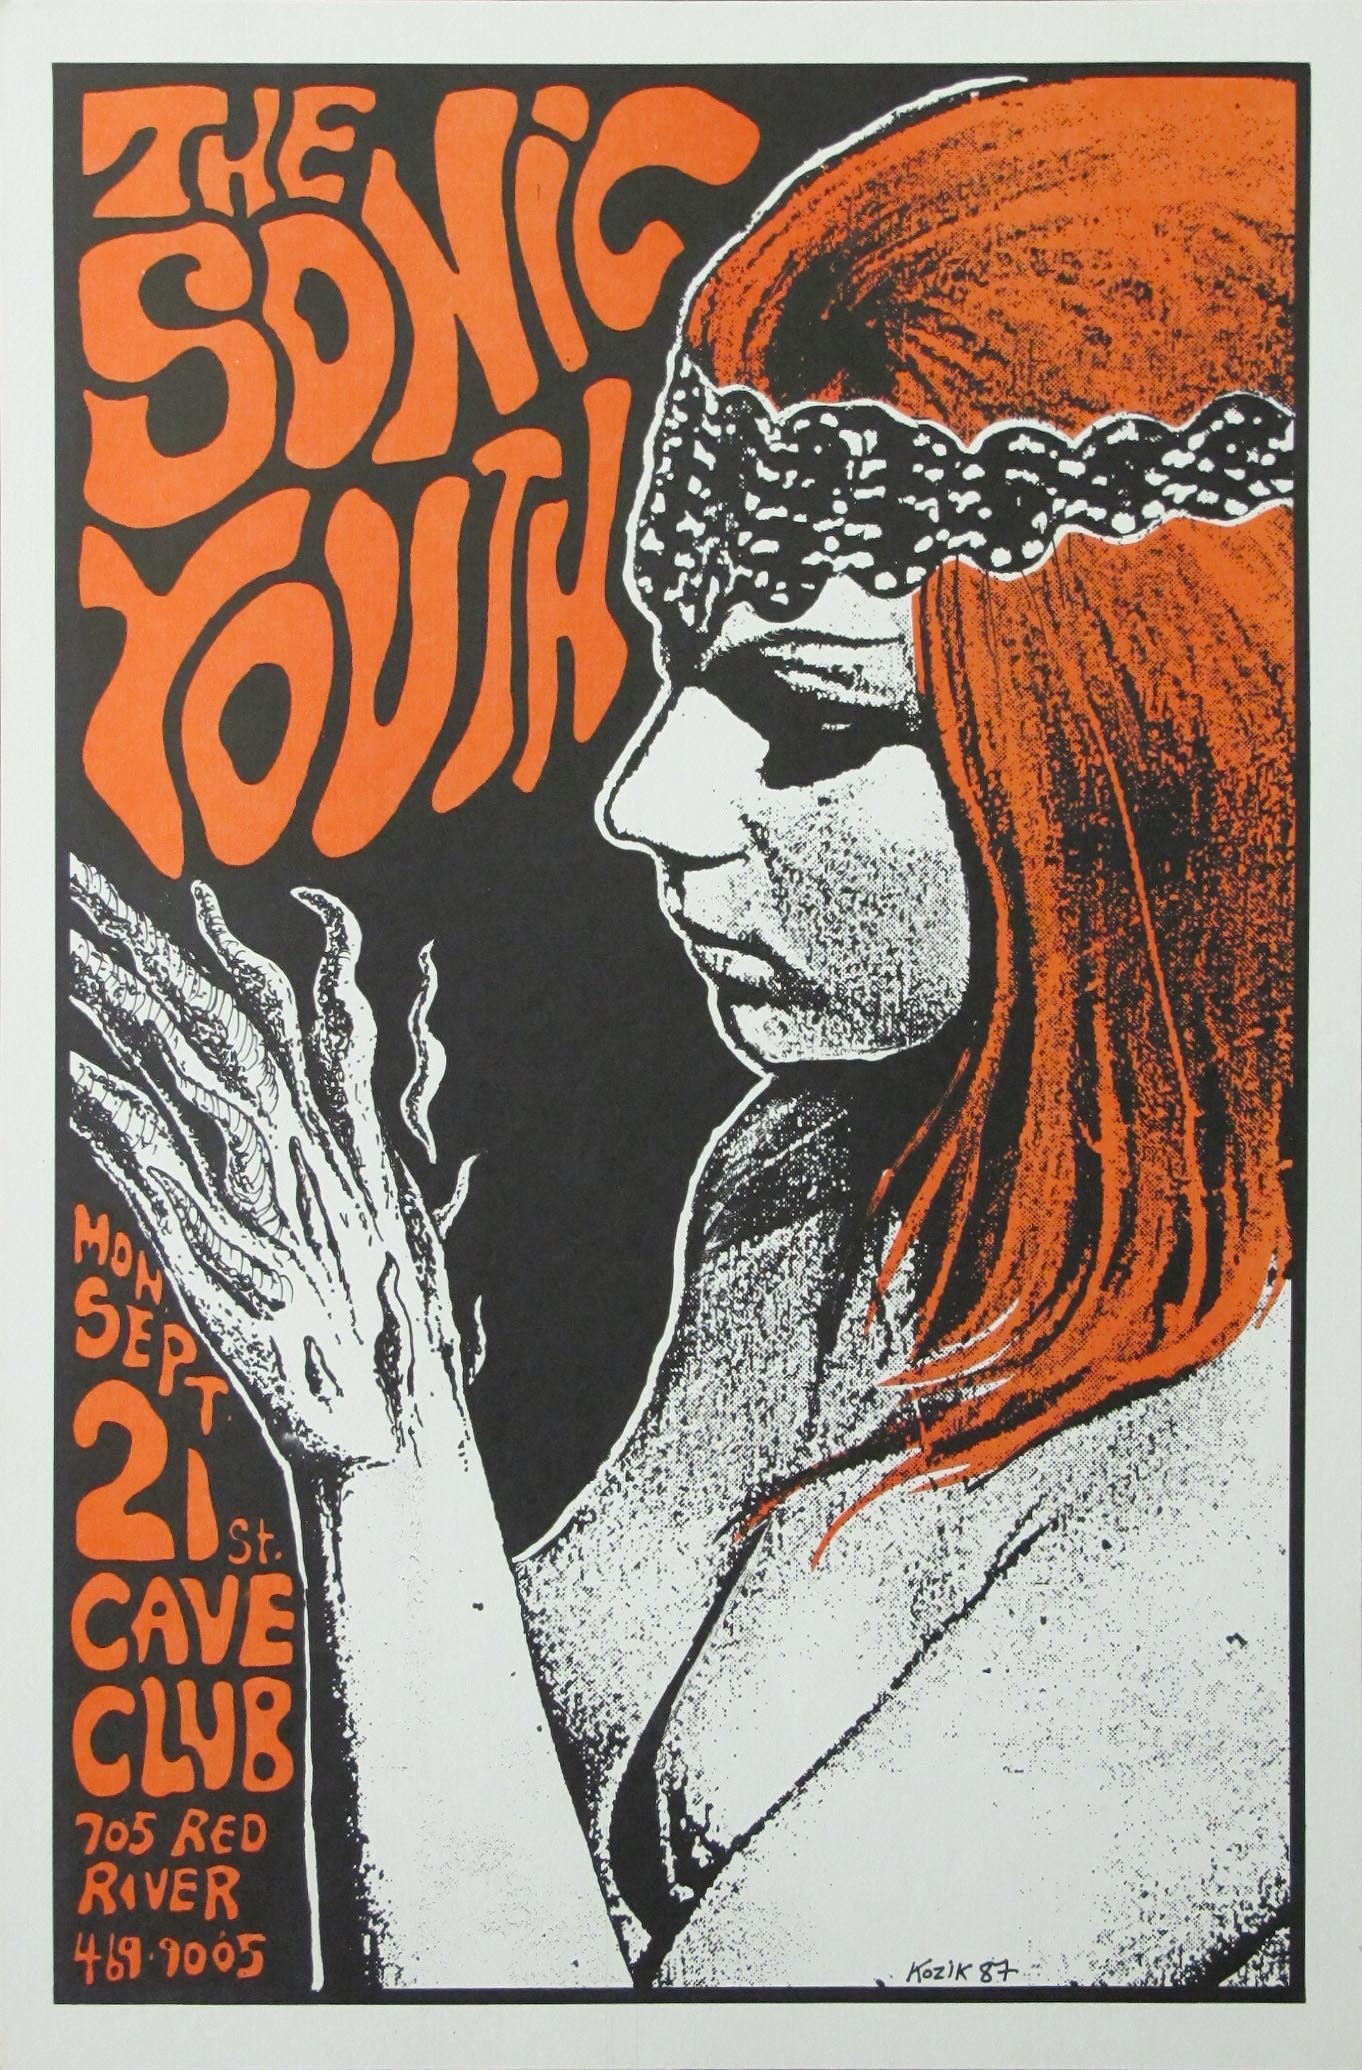 The Sonic Youth Original Concert Poster